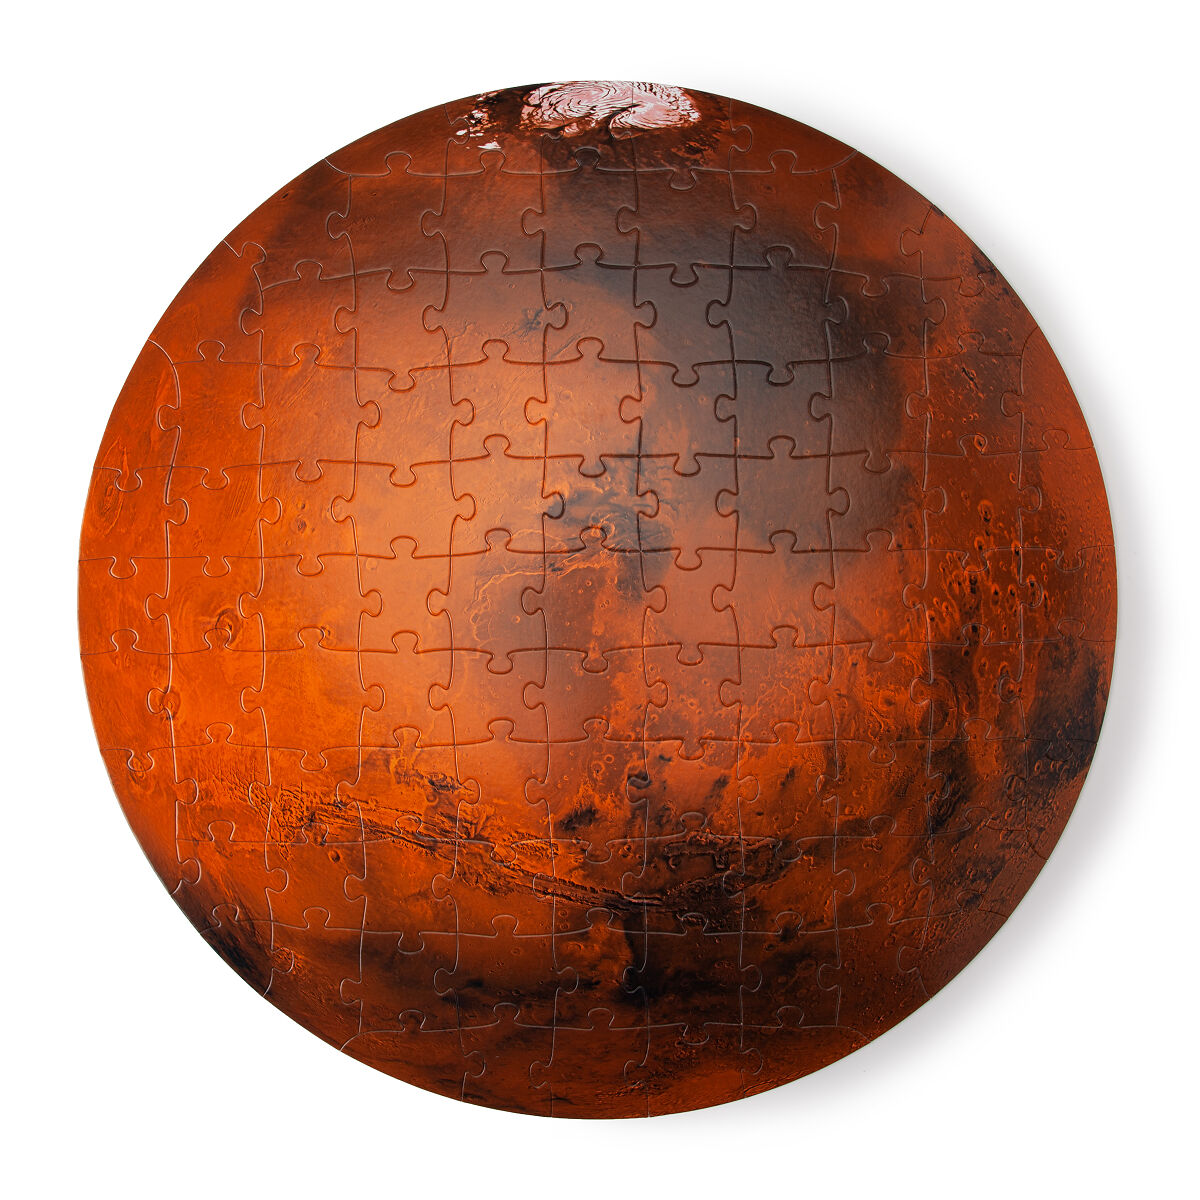 mars-puzzle-100-pieces-puzzle-gift-entertaining-gifts-uncommongoods